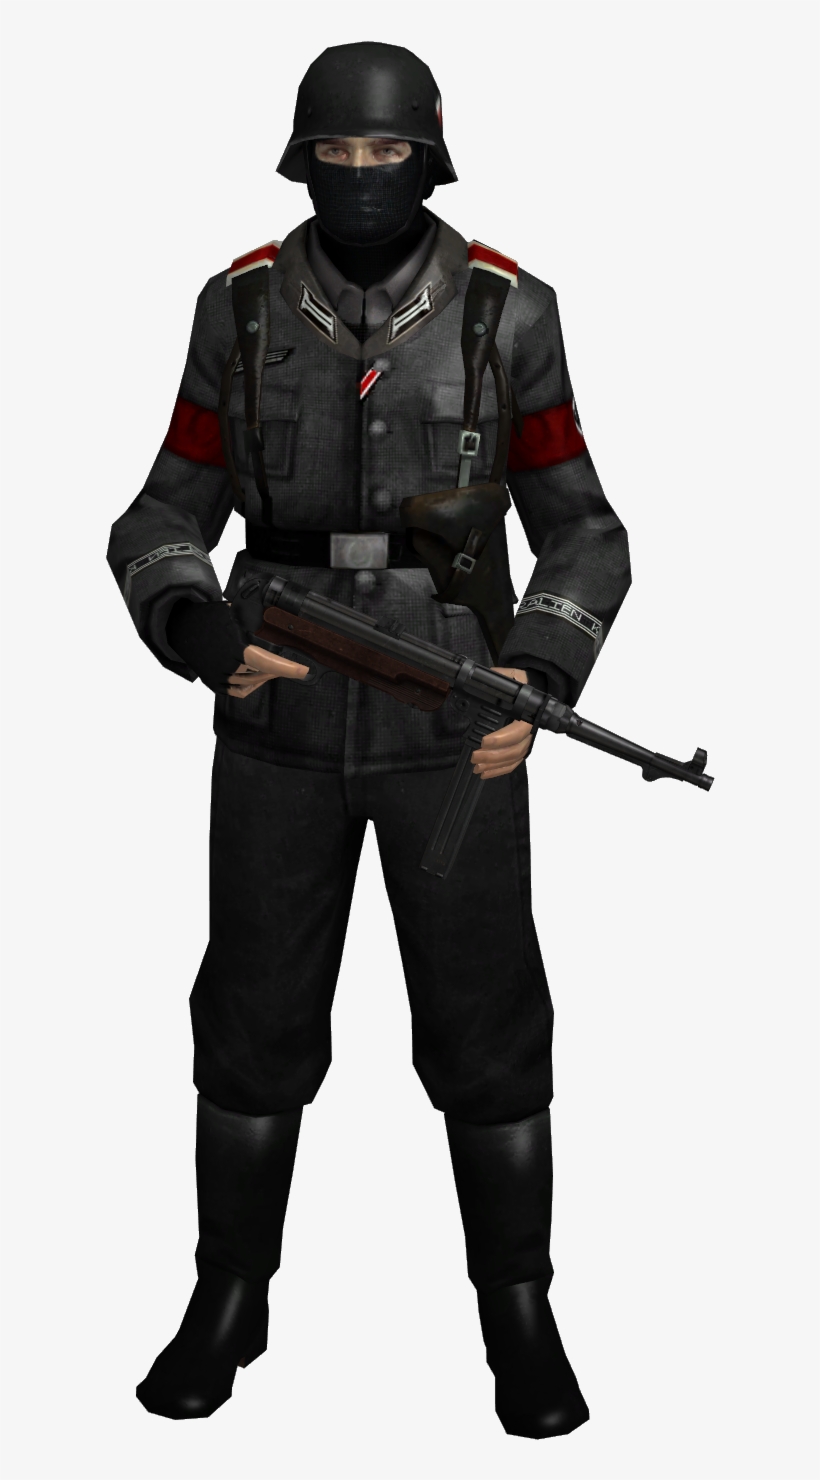 Ww2 Soldier Png - Ww2 German Soldier Png, transparent png #2422746